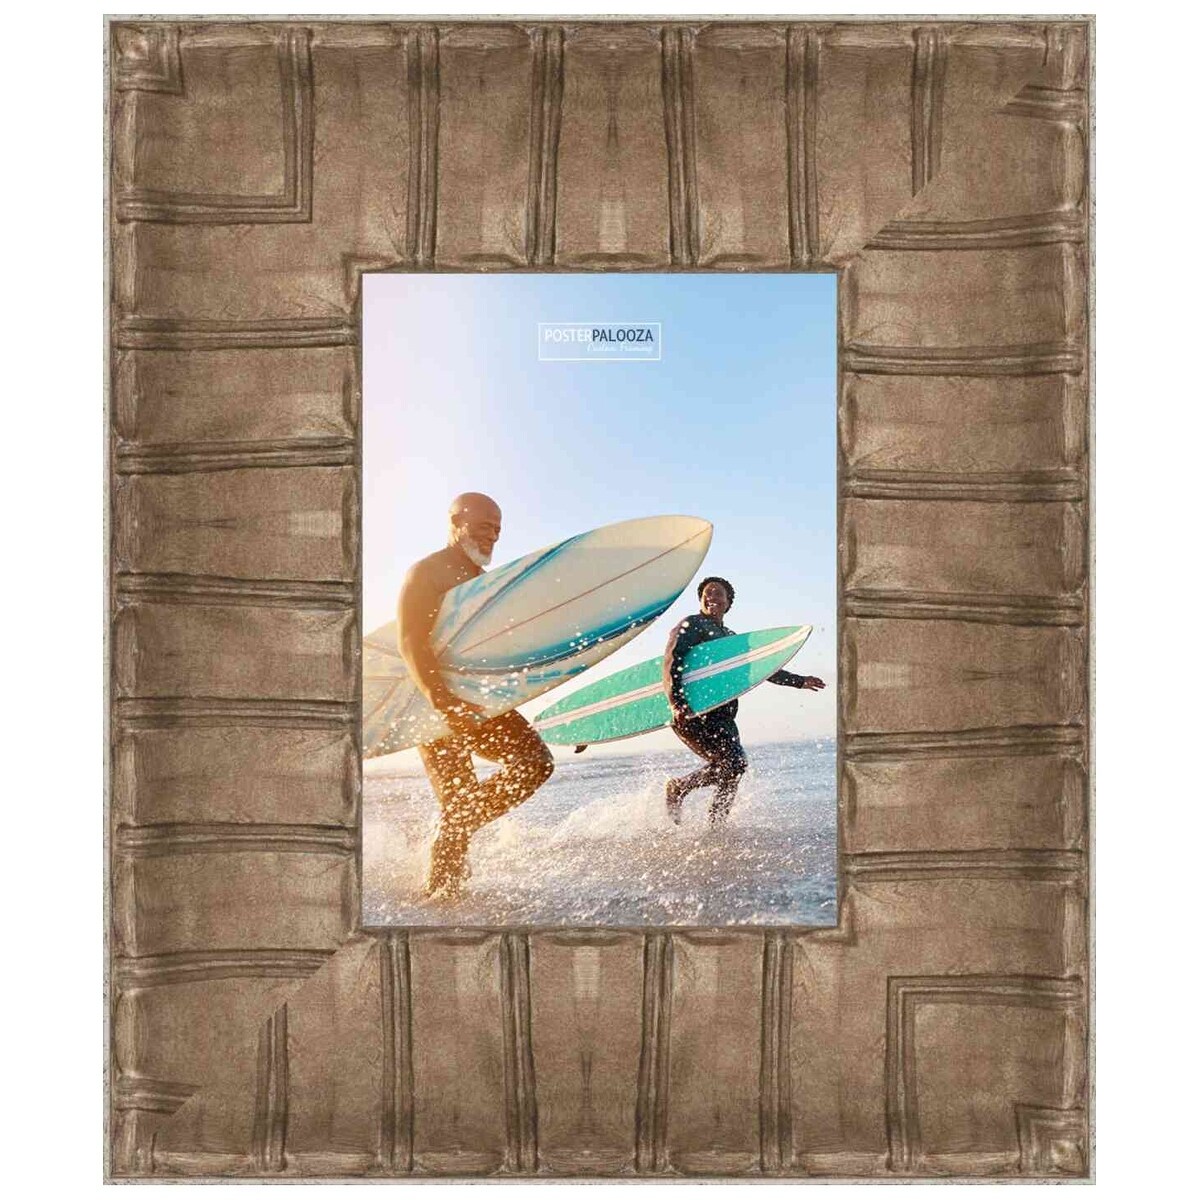 Poster Palooza 11x14 Frame Silver Ornate Antique Solid Wood Picture Frame -  UV Acrylic, Foam Board Backing, & Hanging Hardware Included